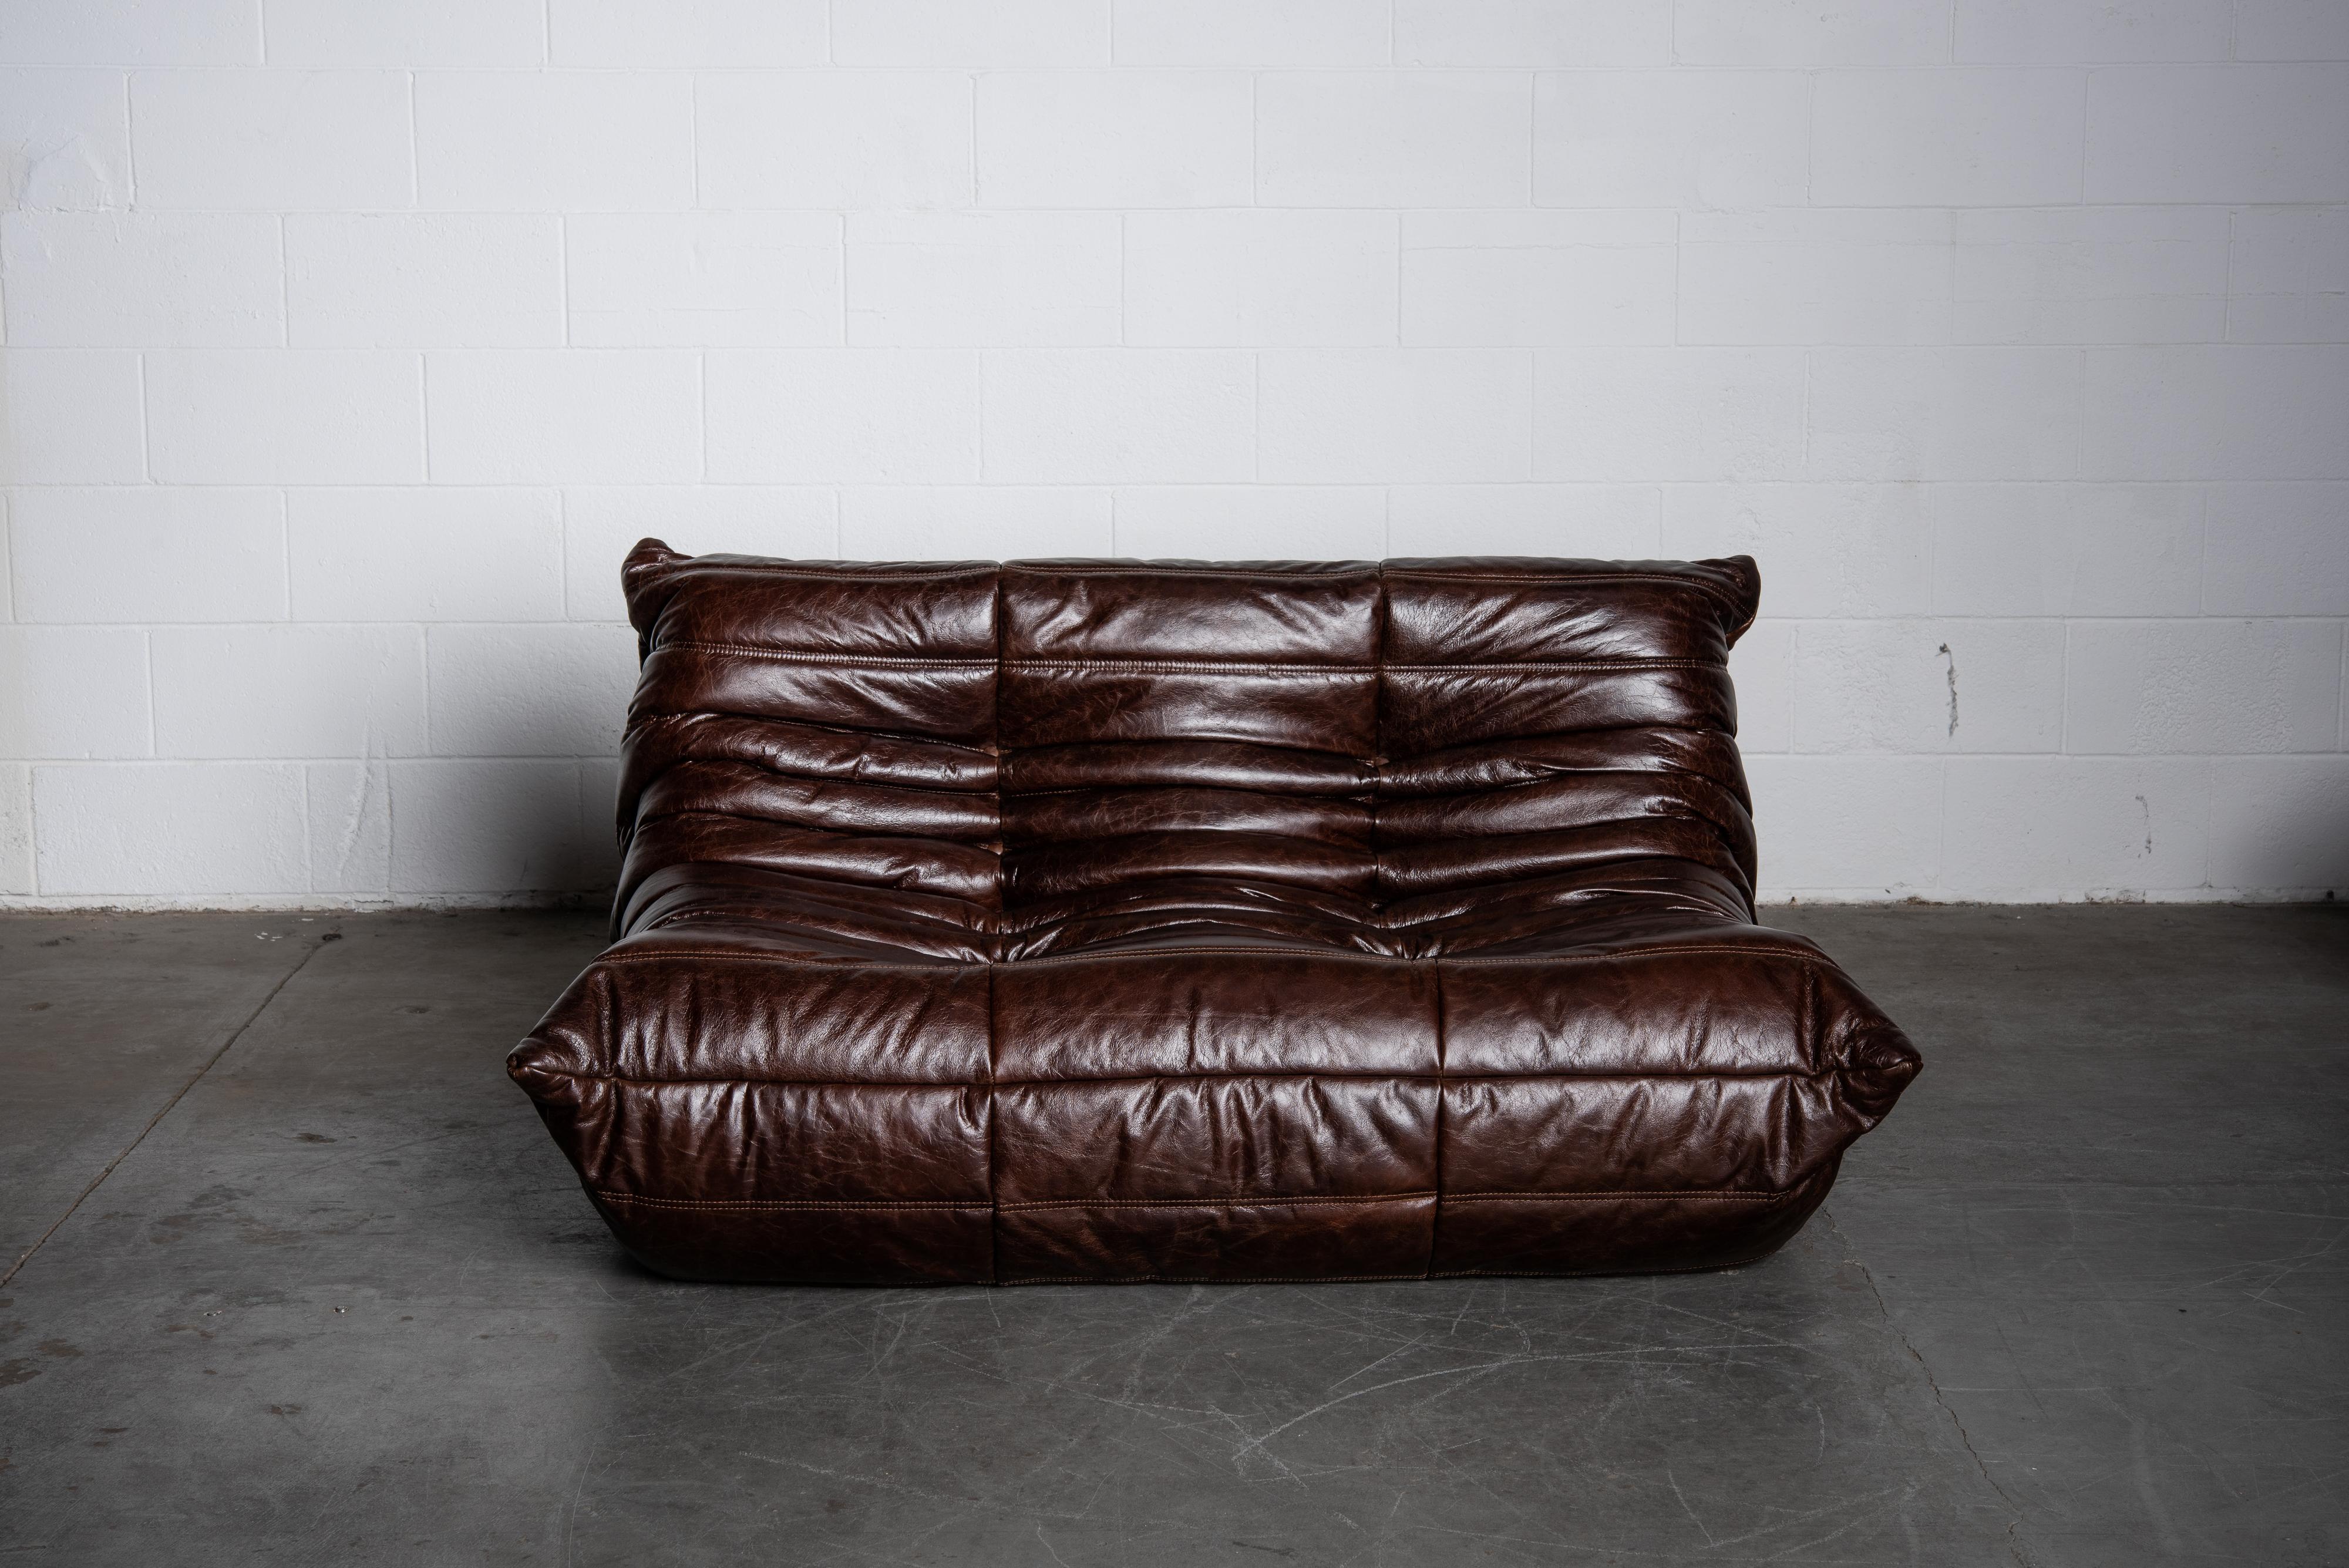 This incredible dark brown leather 'Togo' loveseat sofa was designed by Michel Ducaroy in 1973 for Ligne Roset, France. Signed with Ligne Roset label. Originally designed in the 1970s, this deep chocolate brown leather two-seater sofa was produced